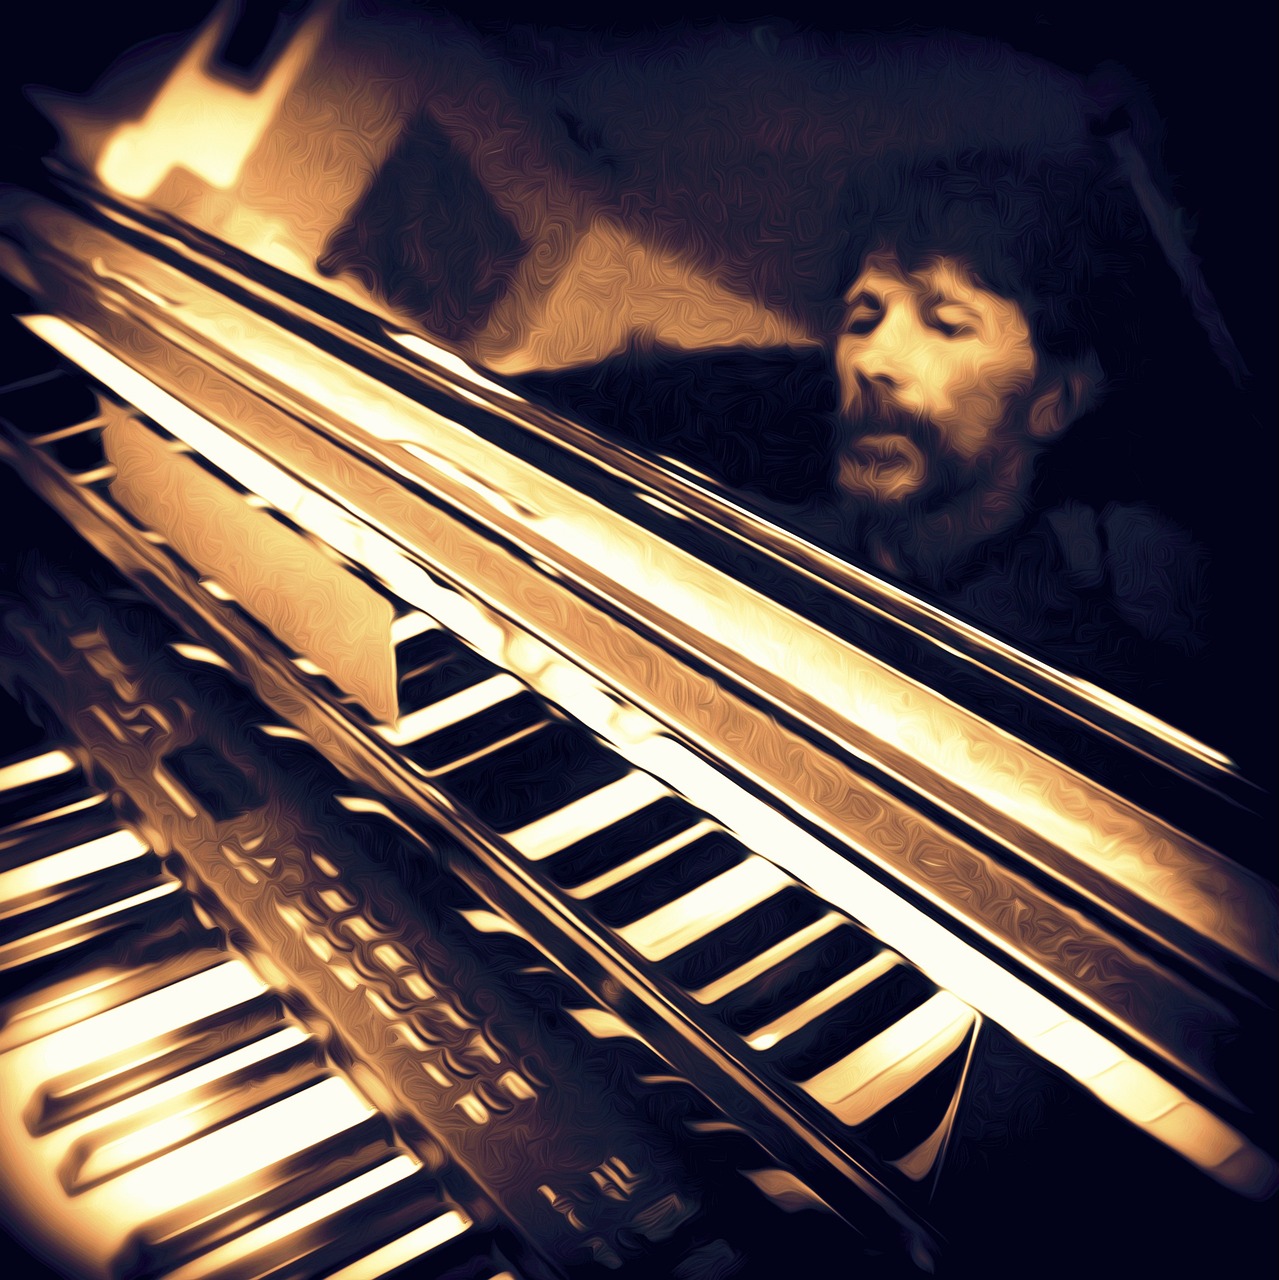 a man that is sitting in front of a piano, inspired by Pál Böhm, flickr, vintage saturation, accurate portrait of a bob dylan, jesus alonso iglesias, up close shot shinji aramaki